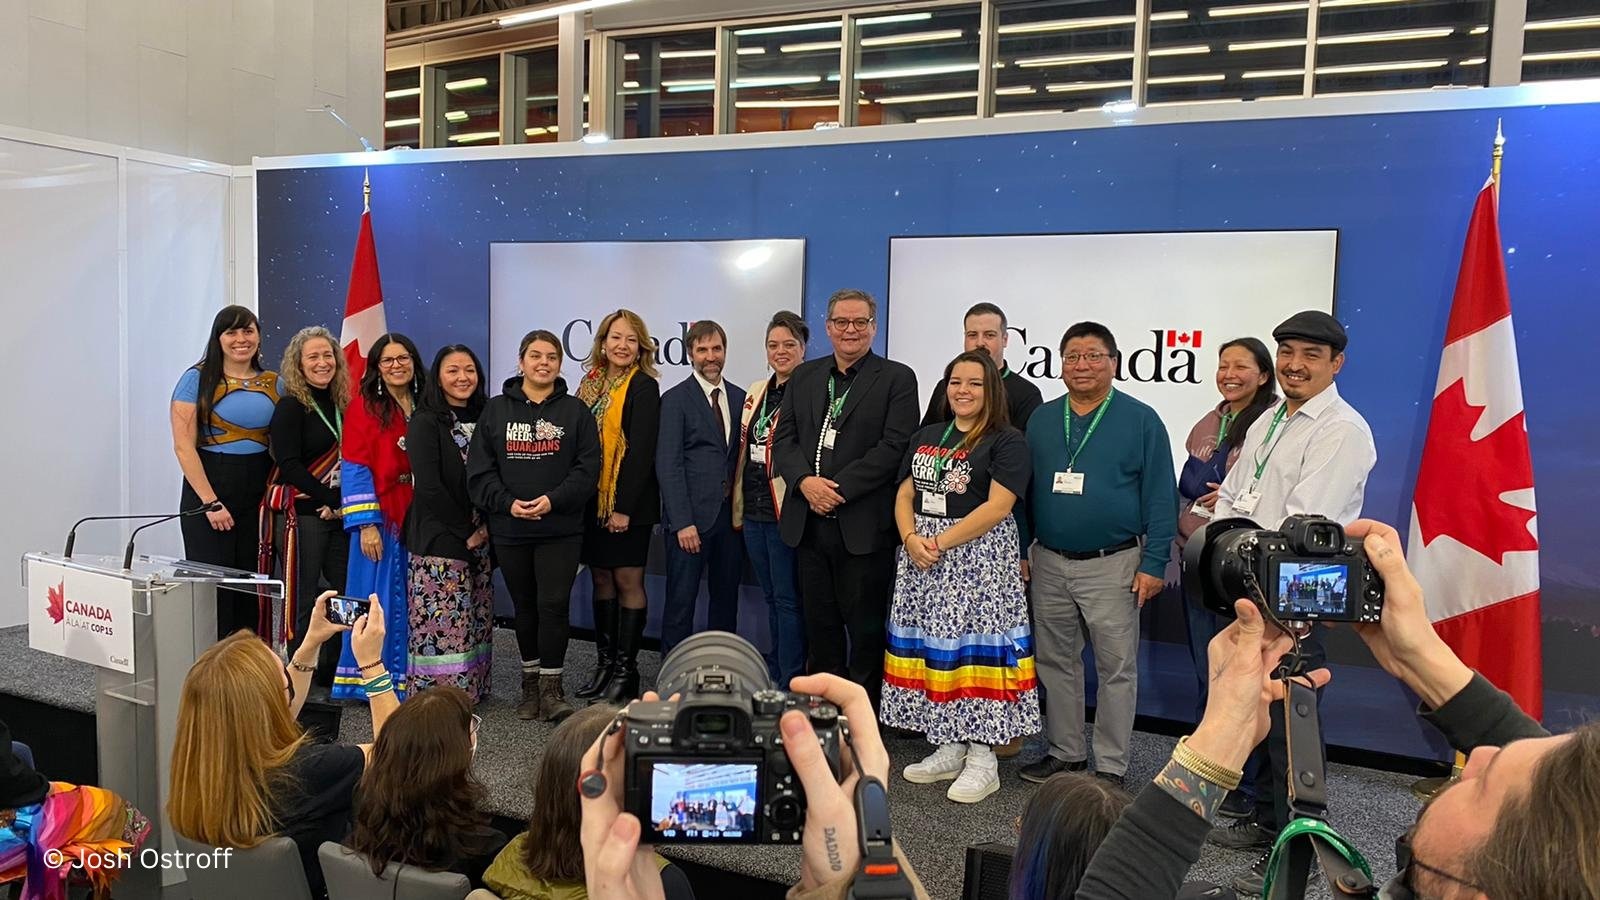 A crowded stage with Indigenous guardians and the environment minister in the middle posing for a group photo